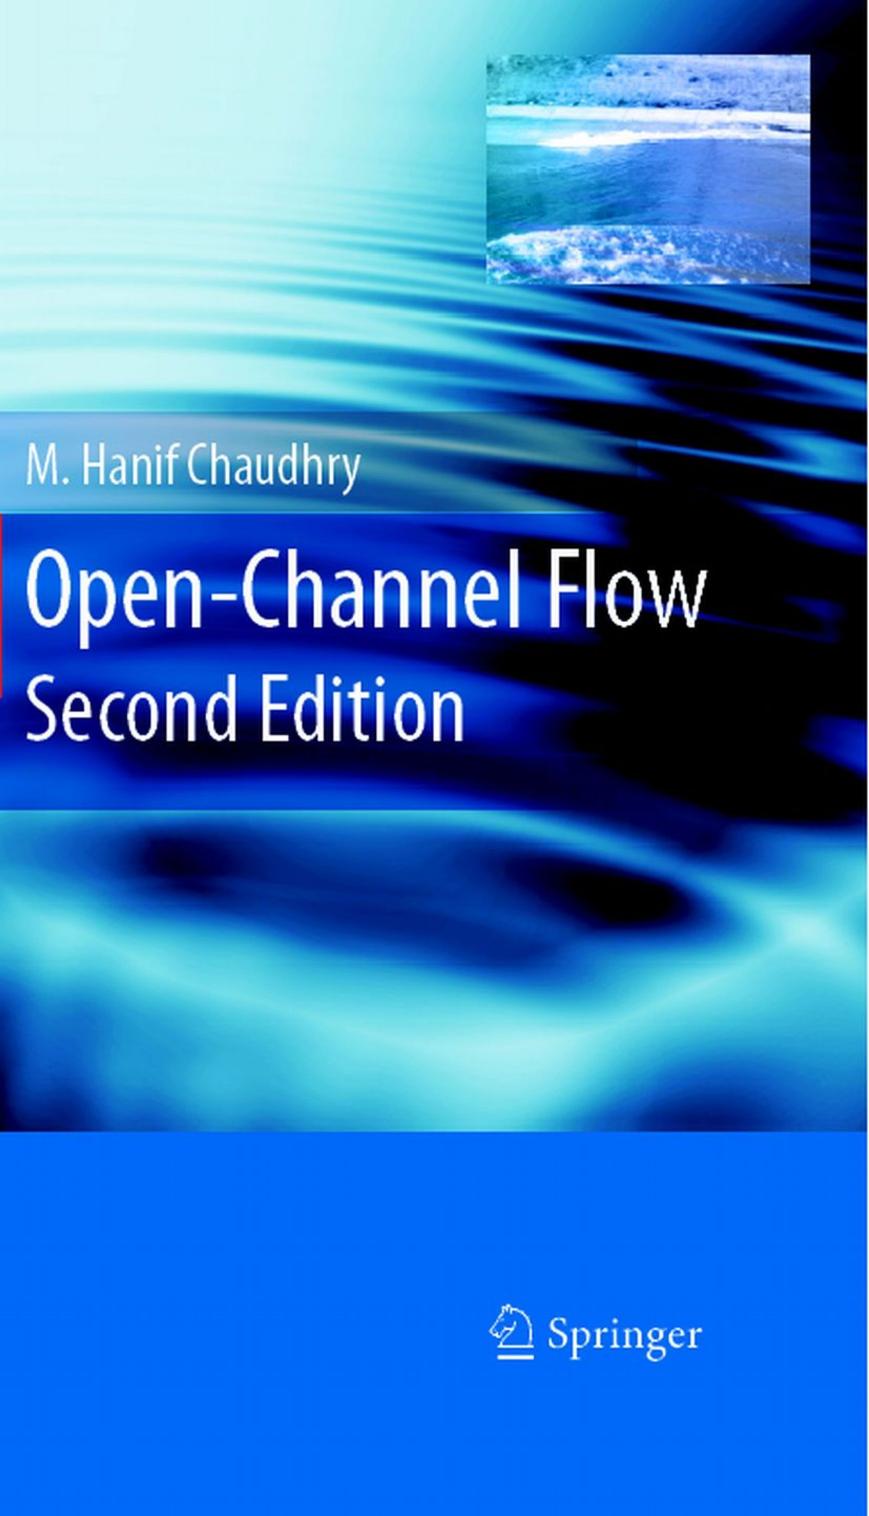 open-channel book by chaudhry